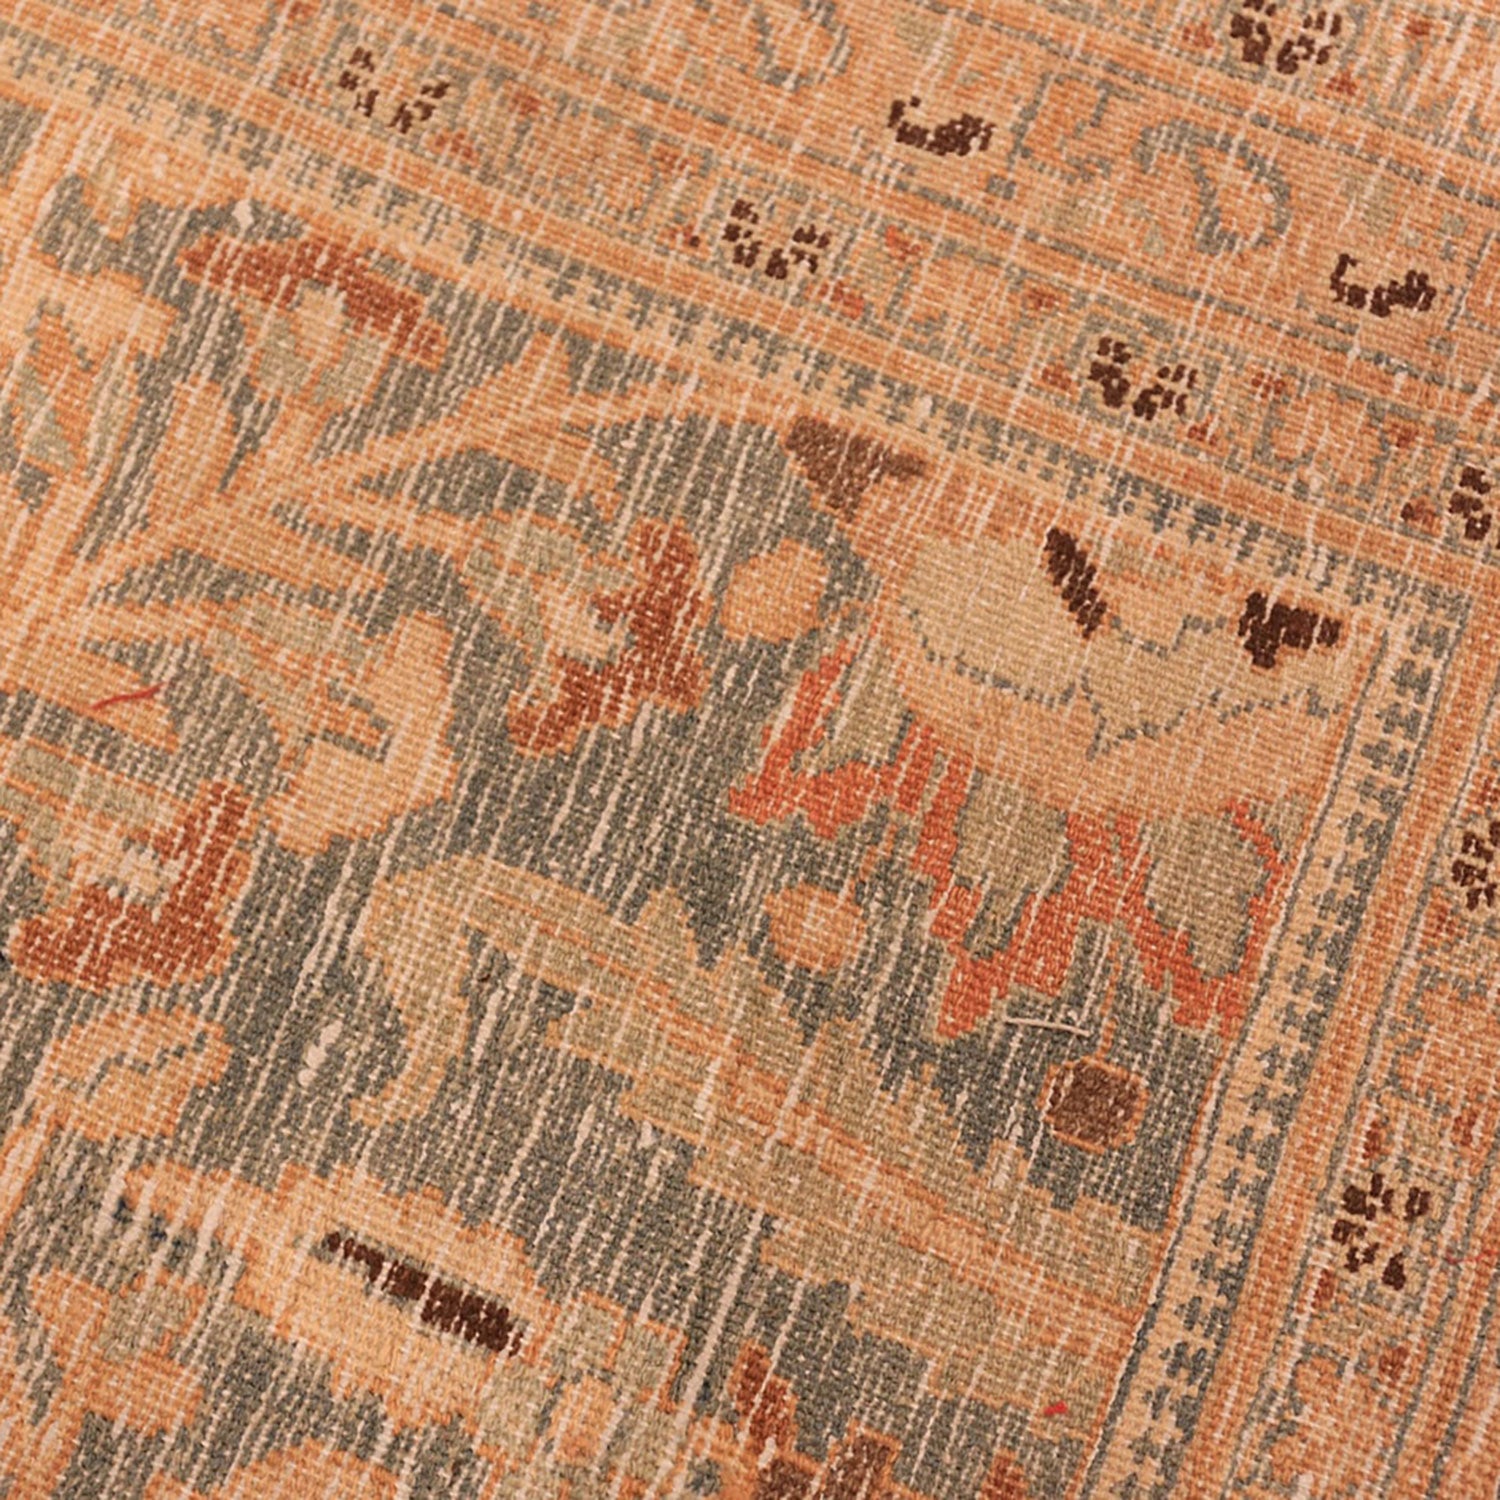 Close-up of weathered patterned carpet with vintage aesthetic in muted colors.